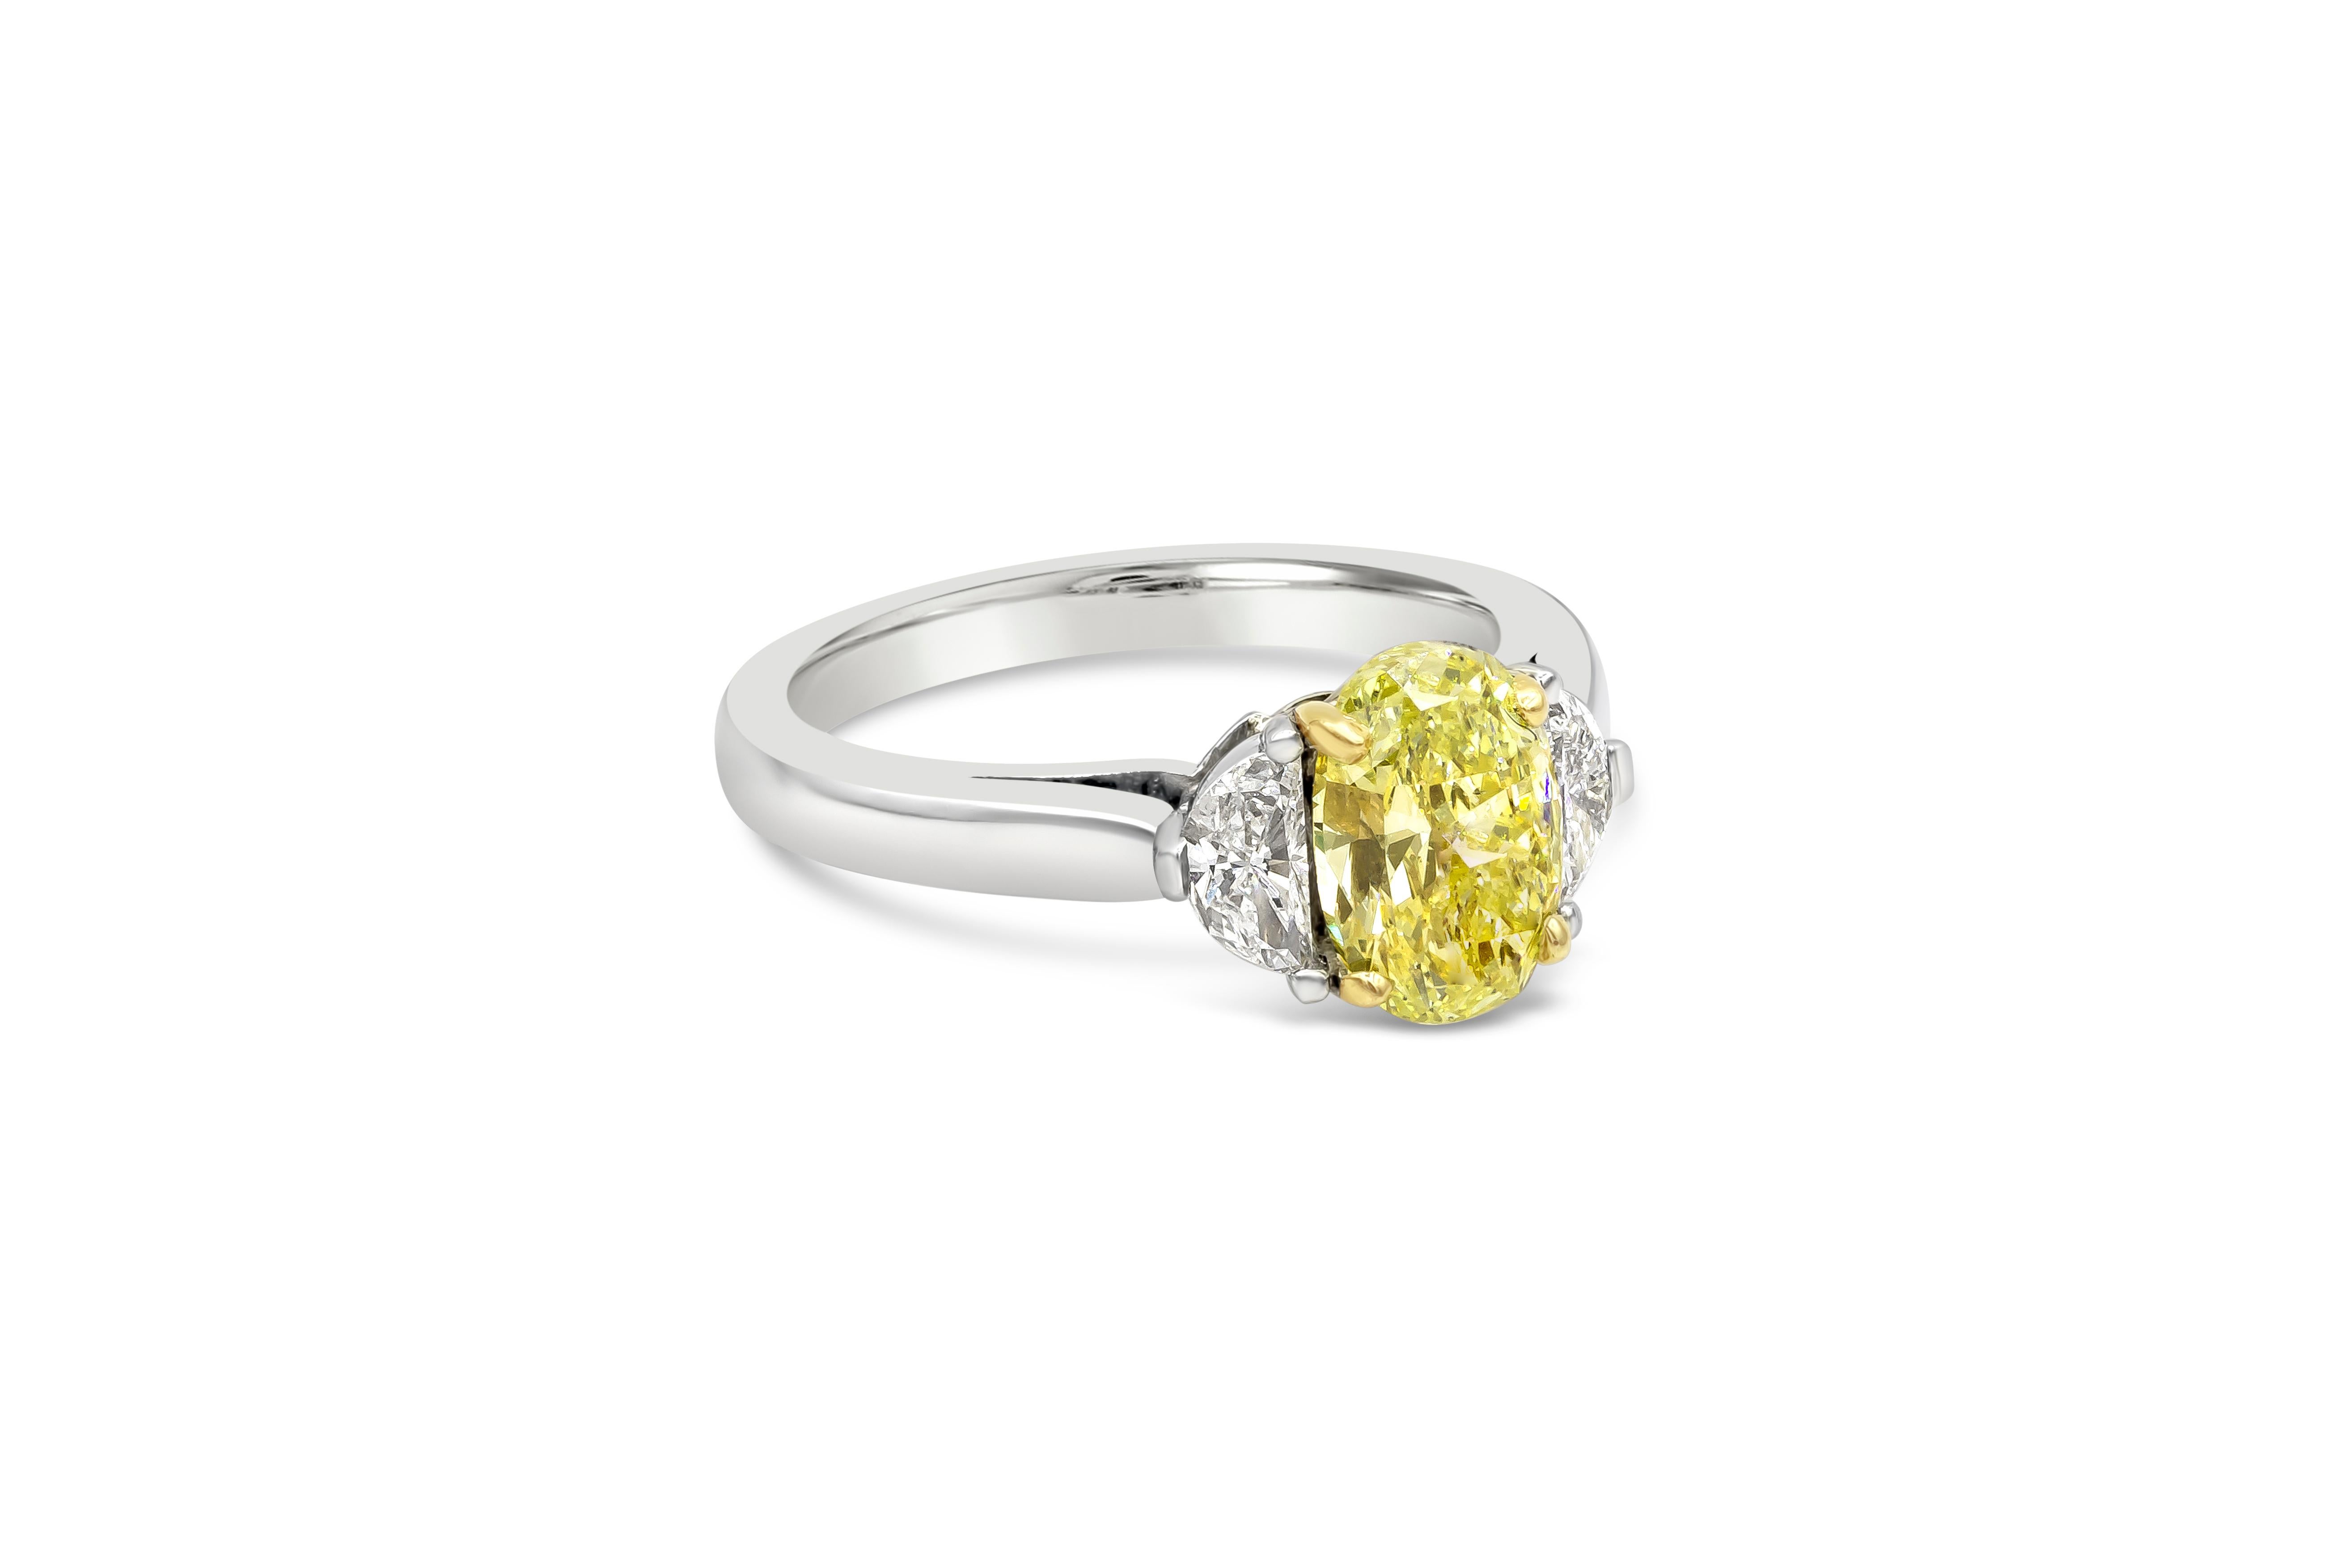 A classic three-stone engagement ring style, showcasing a 1.50 carat color-rich oval diamond certified by GIA as Fancy Intense Yellow color. Flanking the center are half moon diamonds on each side weighing 0.29 carats total. Set in a handcrafted